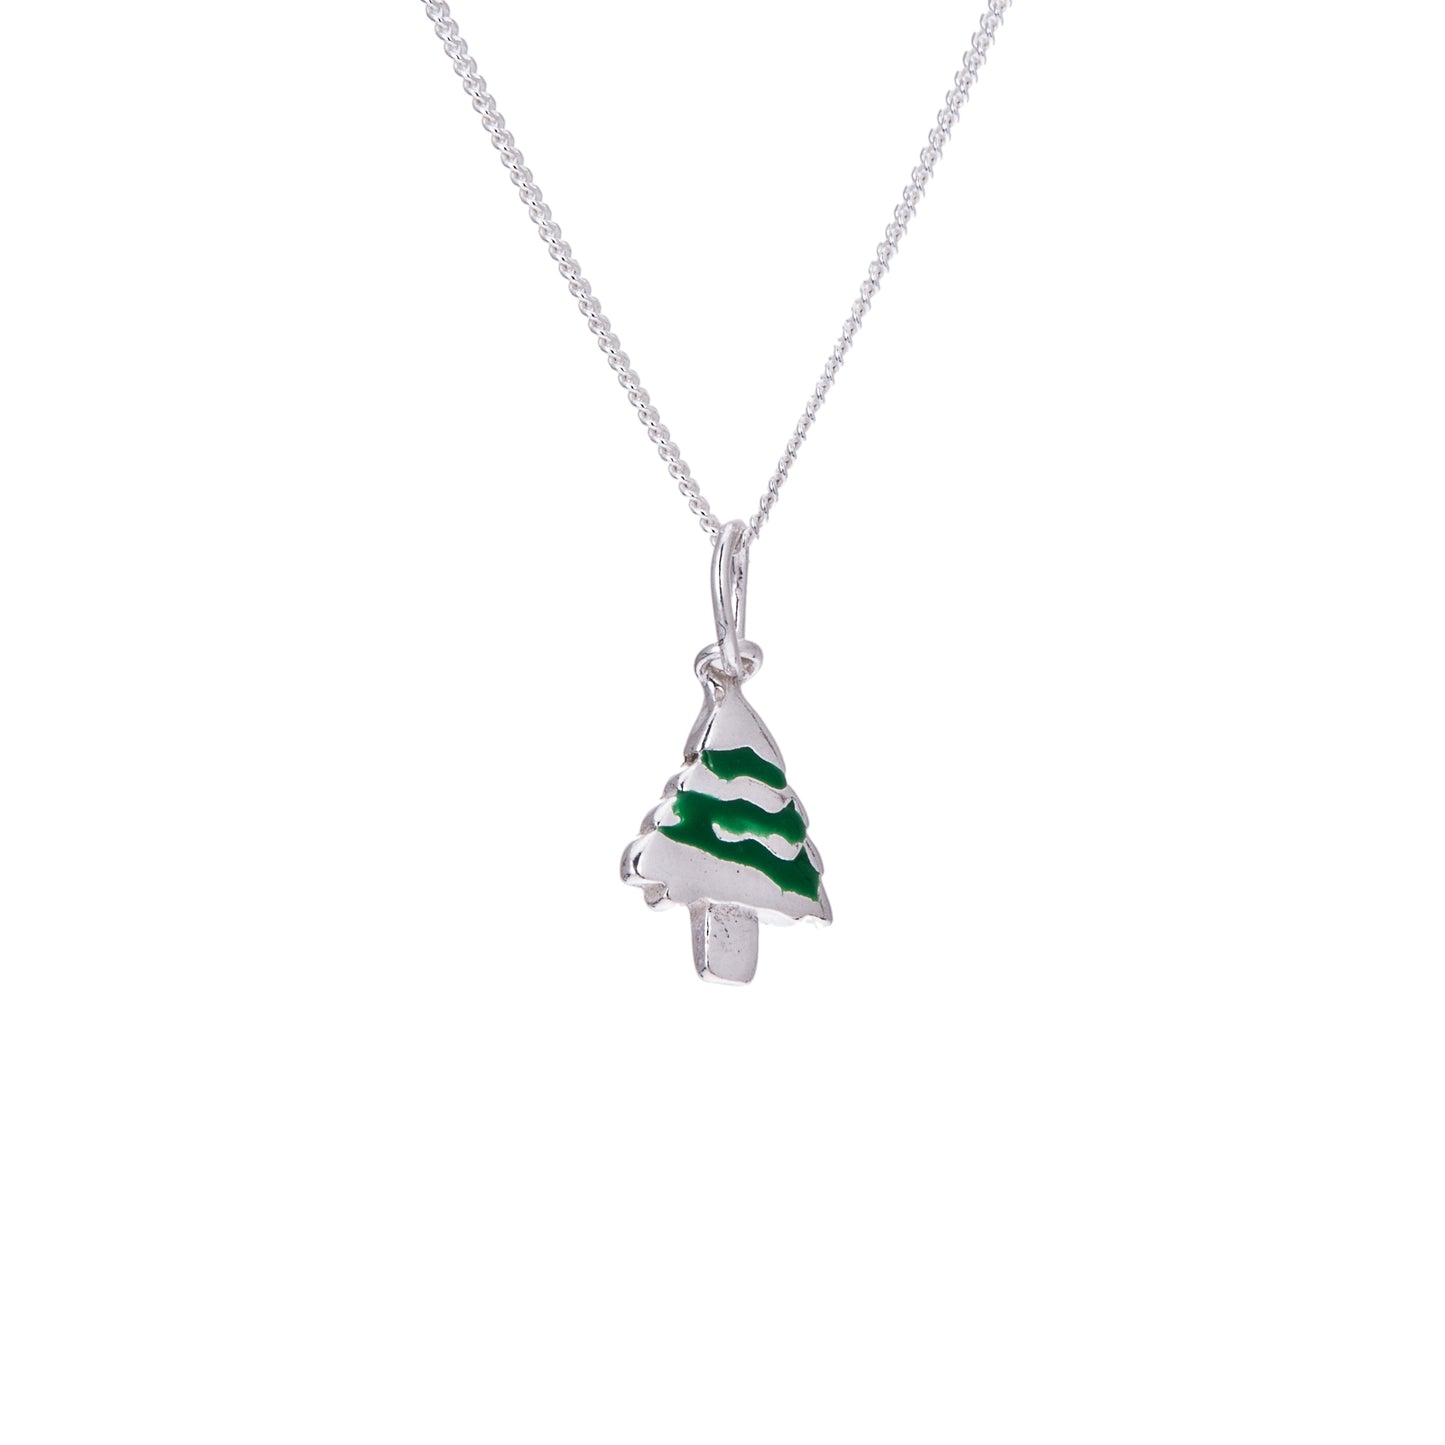 Sterling Silver Enamel Christmas Tree Necklace - 16 - 32 Inches